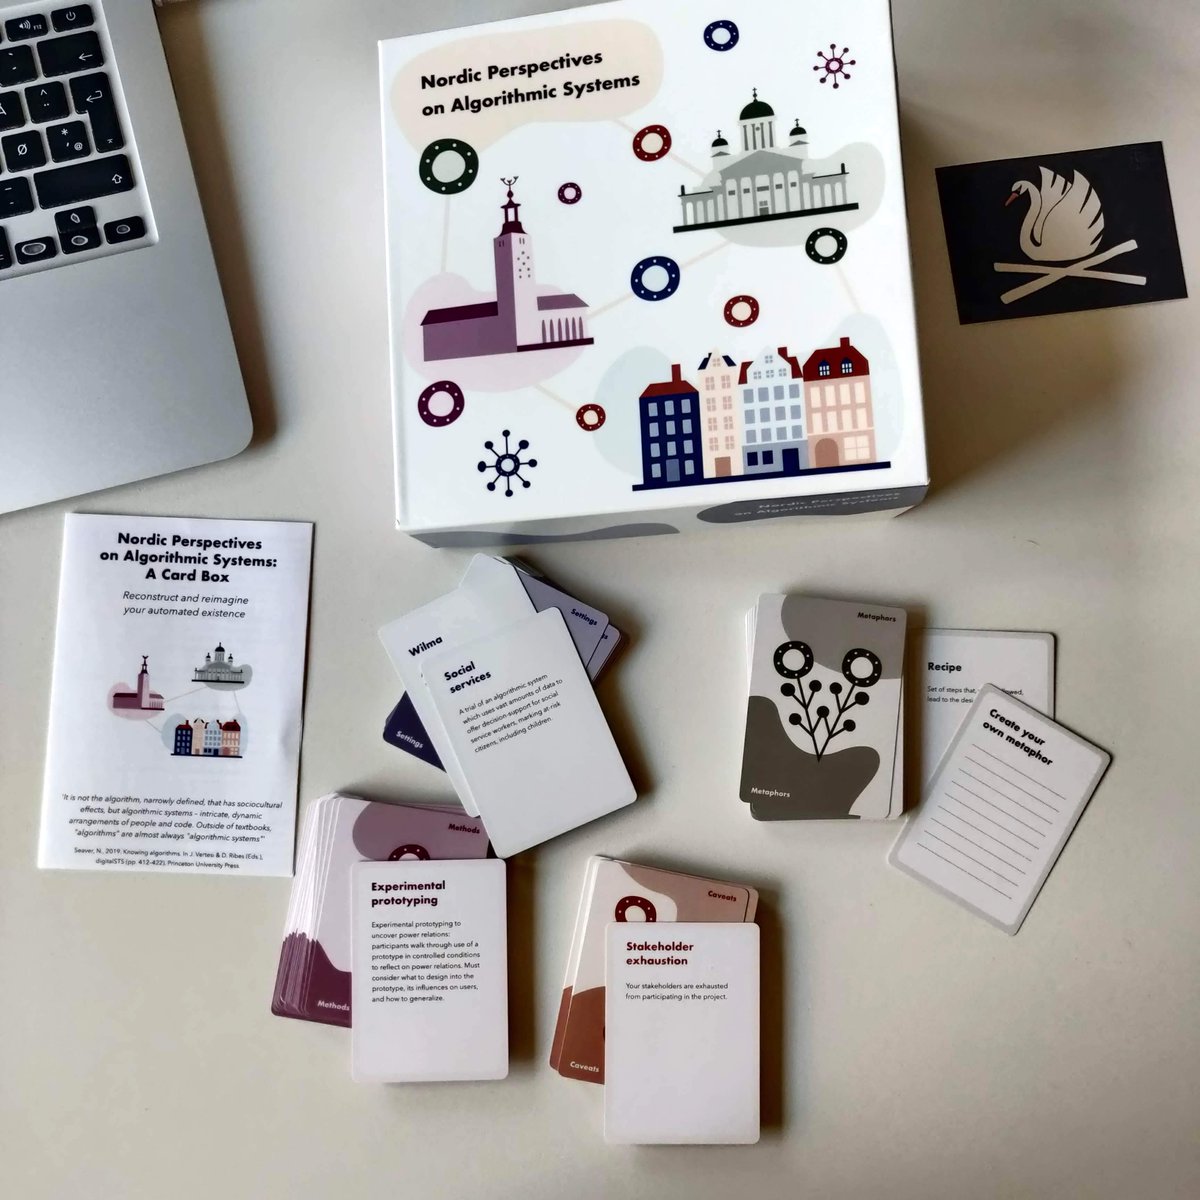 'Nordic Perspectives on Algorithmic Systems' card set 🂠🂠🂠🂠, an output from an cool workshop serie led by @airi_, Marisa Cohn, @pedro2_0, @verlook, Thomas Olsson, @matnel and @barbro66 and which I had the pleasure to contribute to with @MichHockenhull *<:)